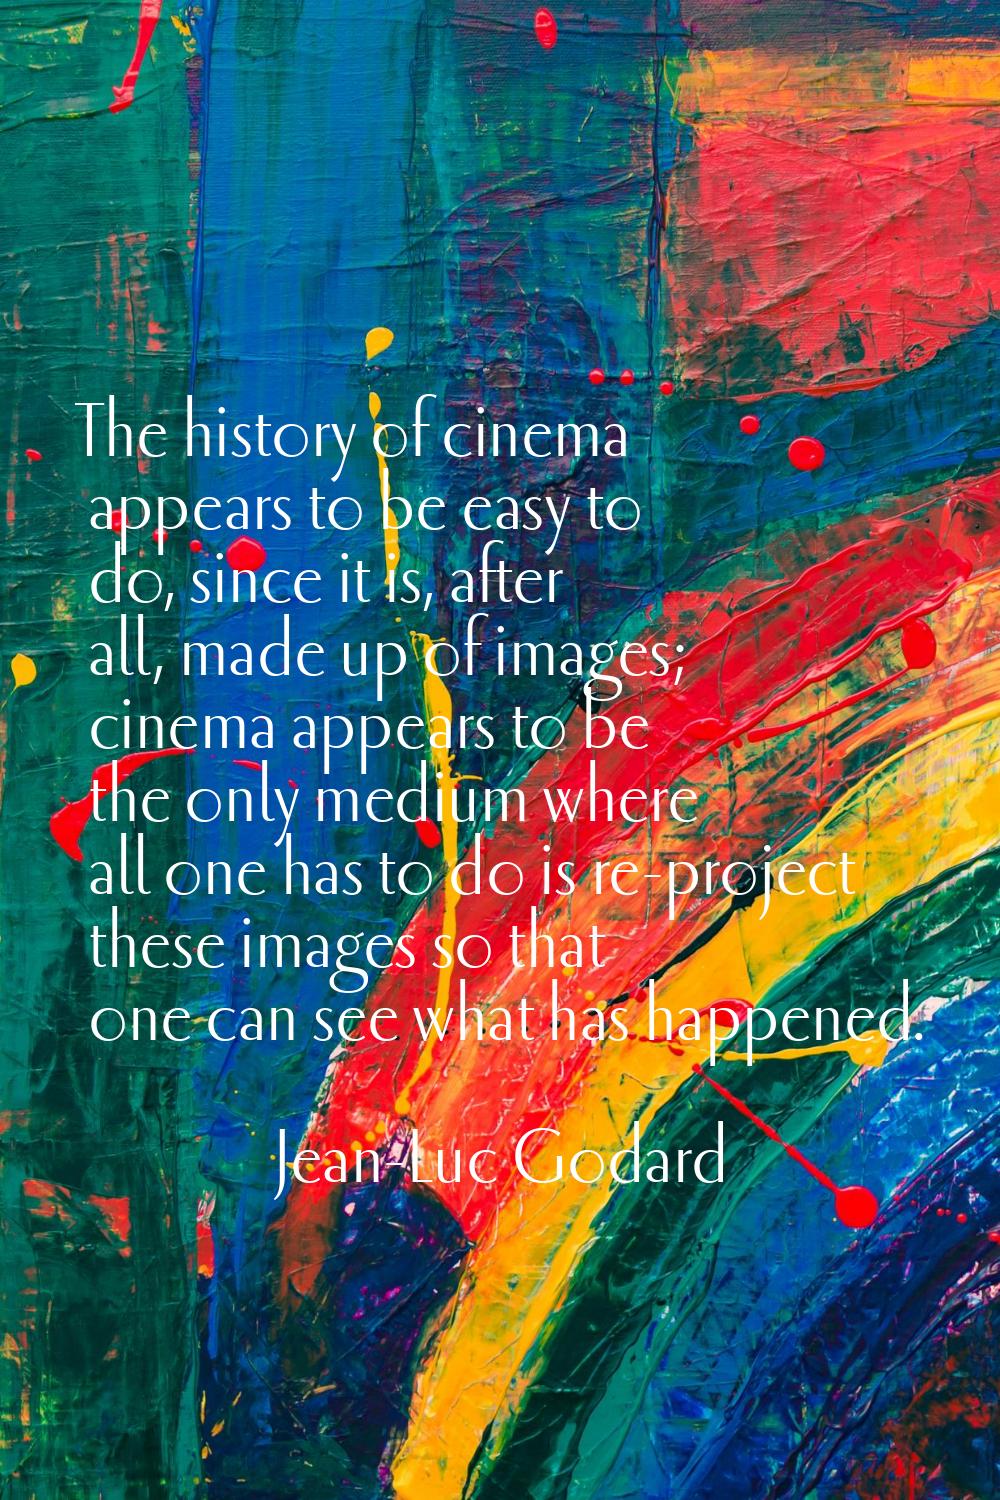 The history of cinema appears to be easy to do, since it is, after all, made up of images; cinema a